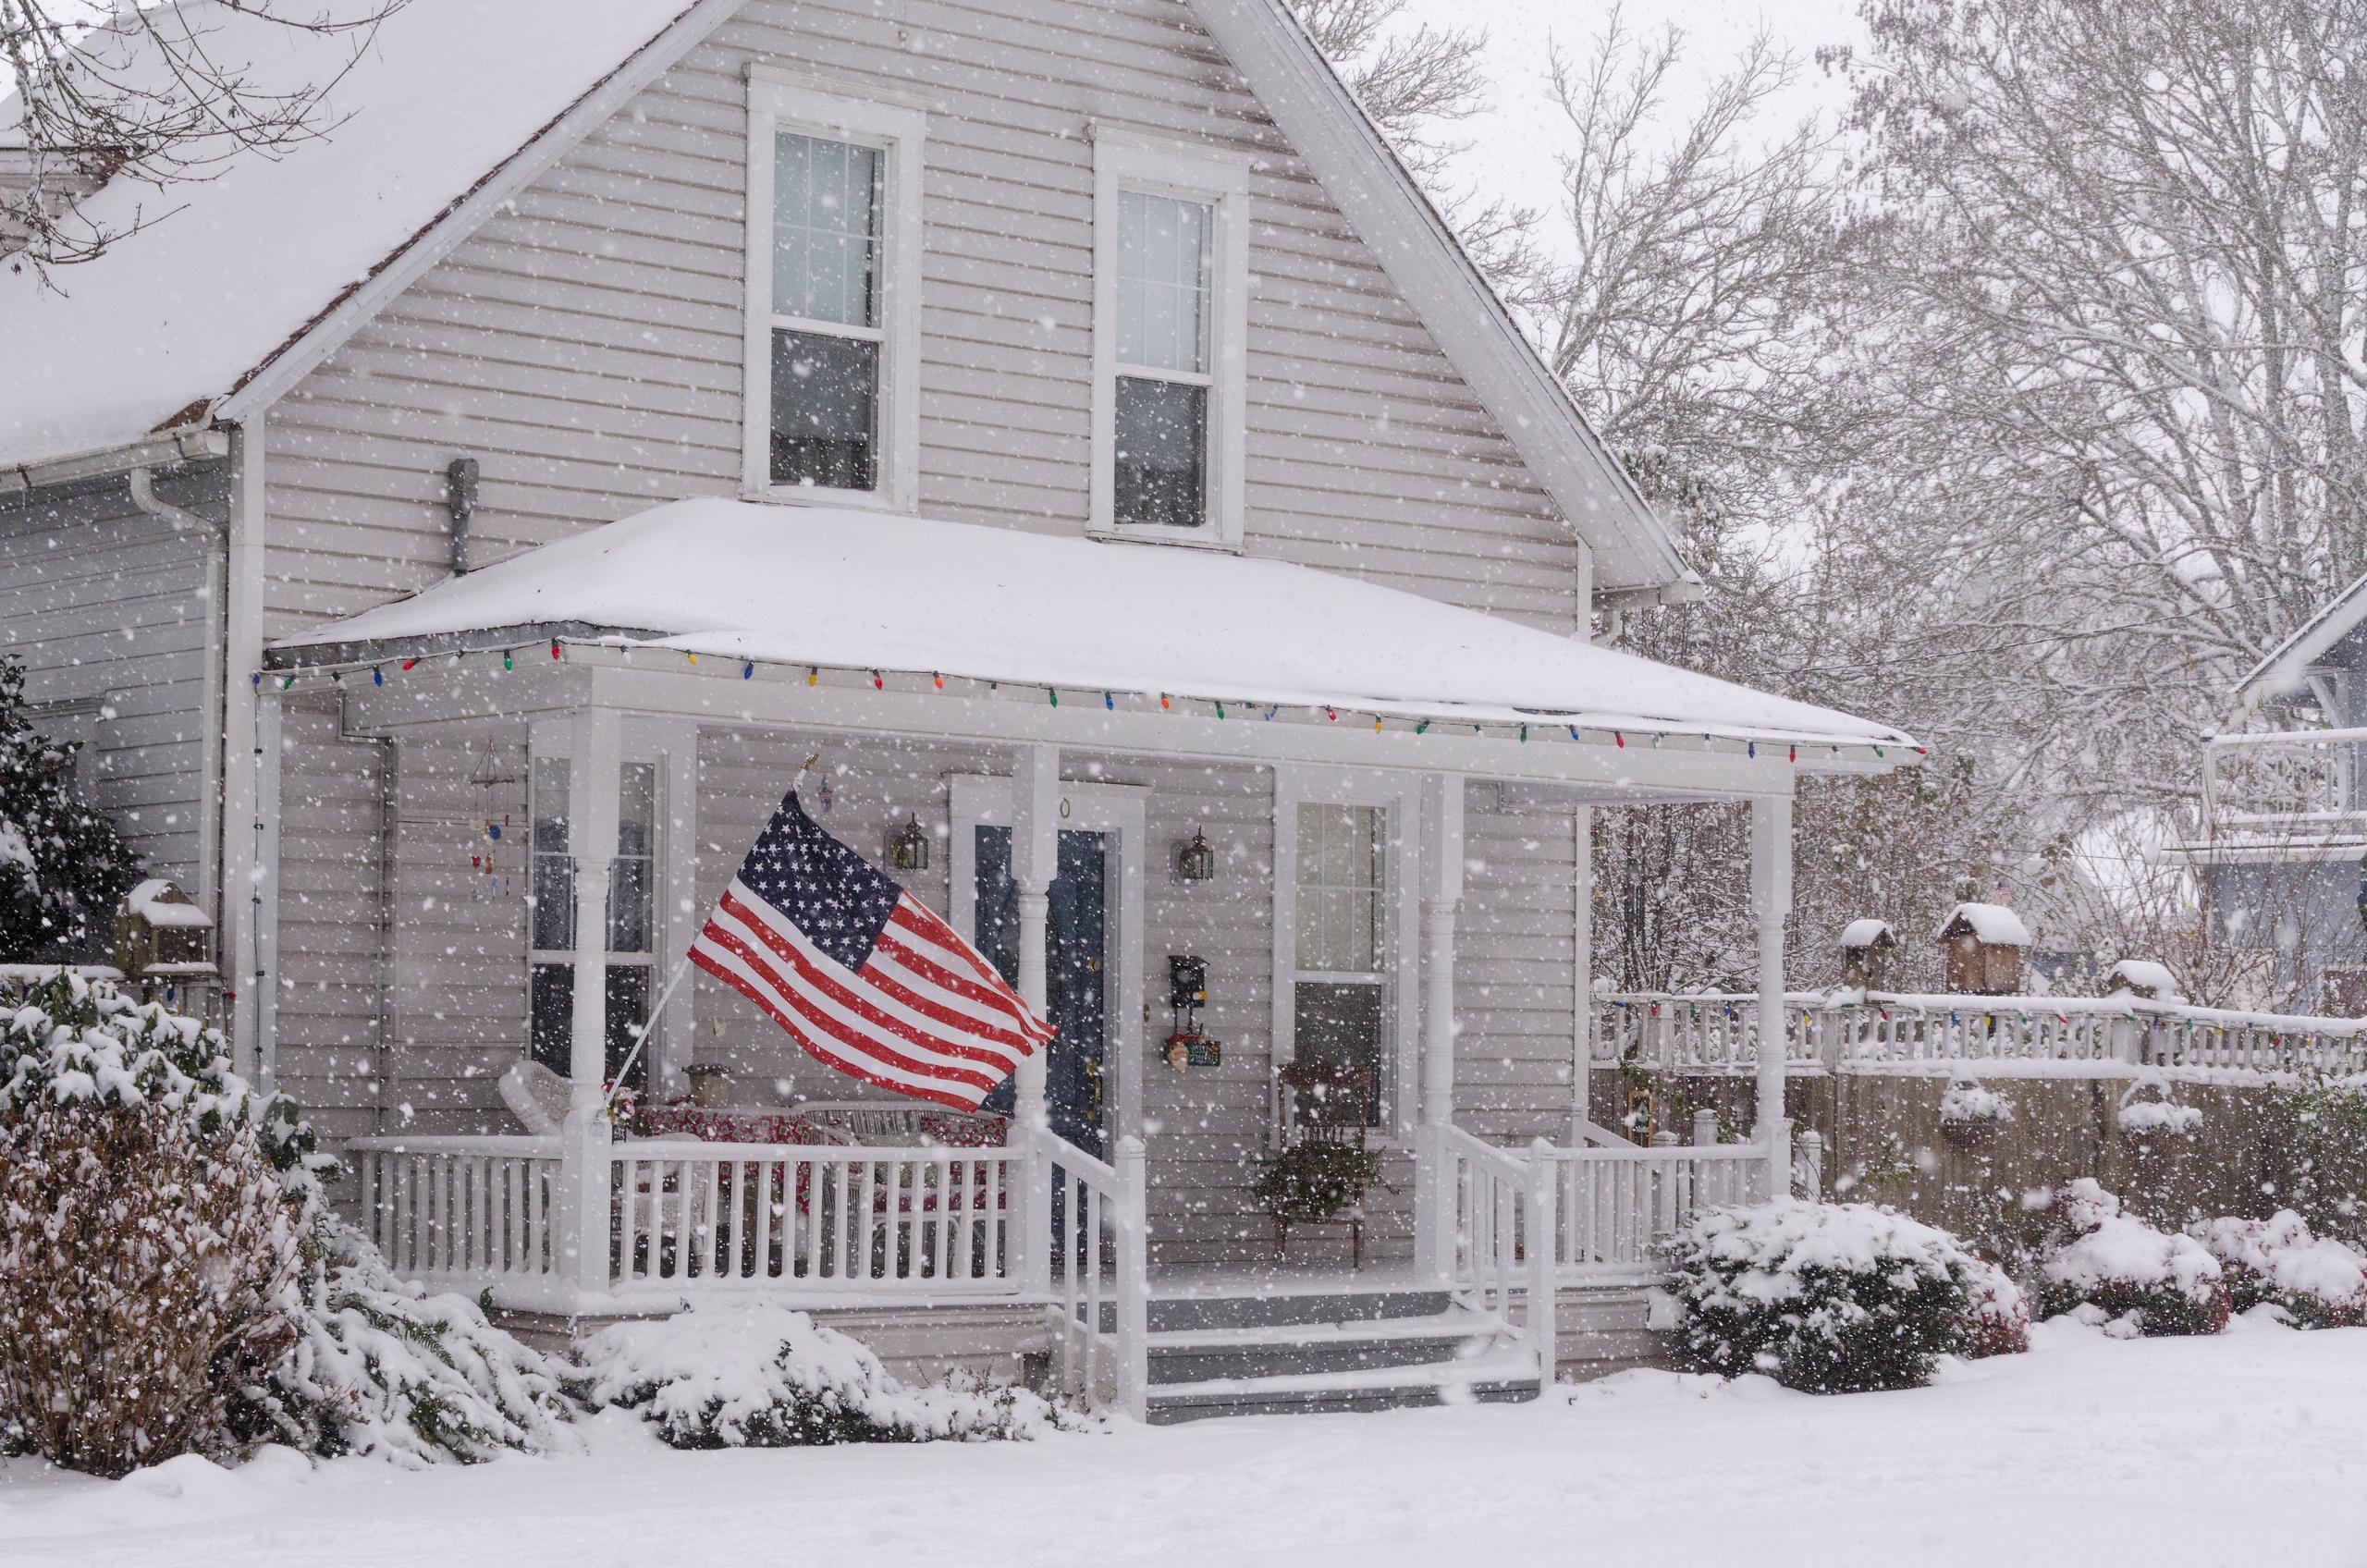 A house with an American flag while snow falls